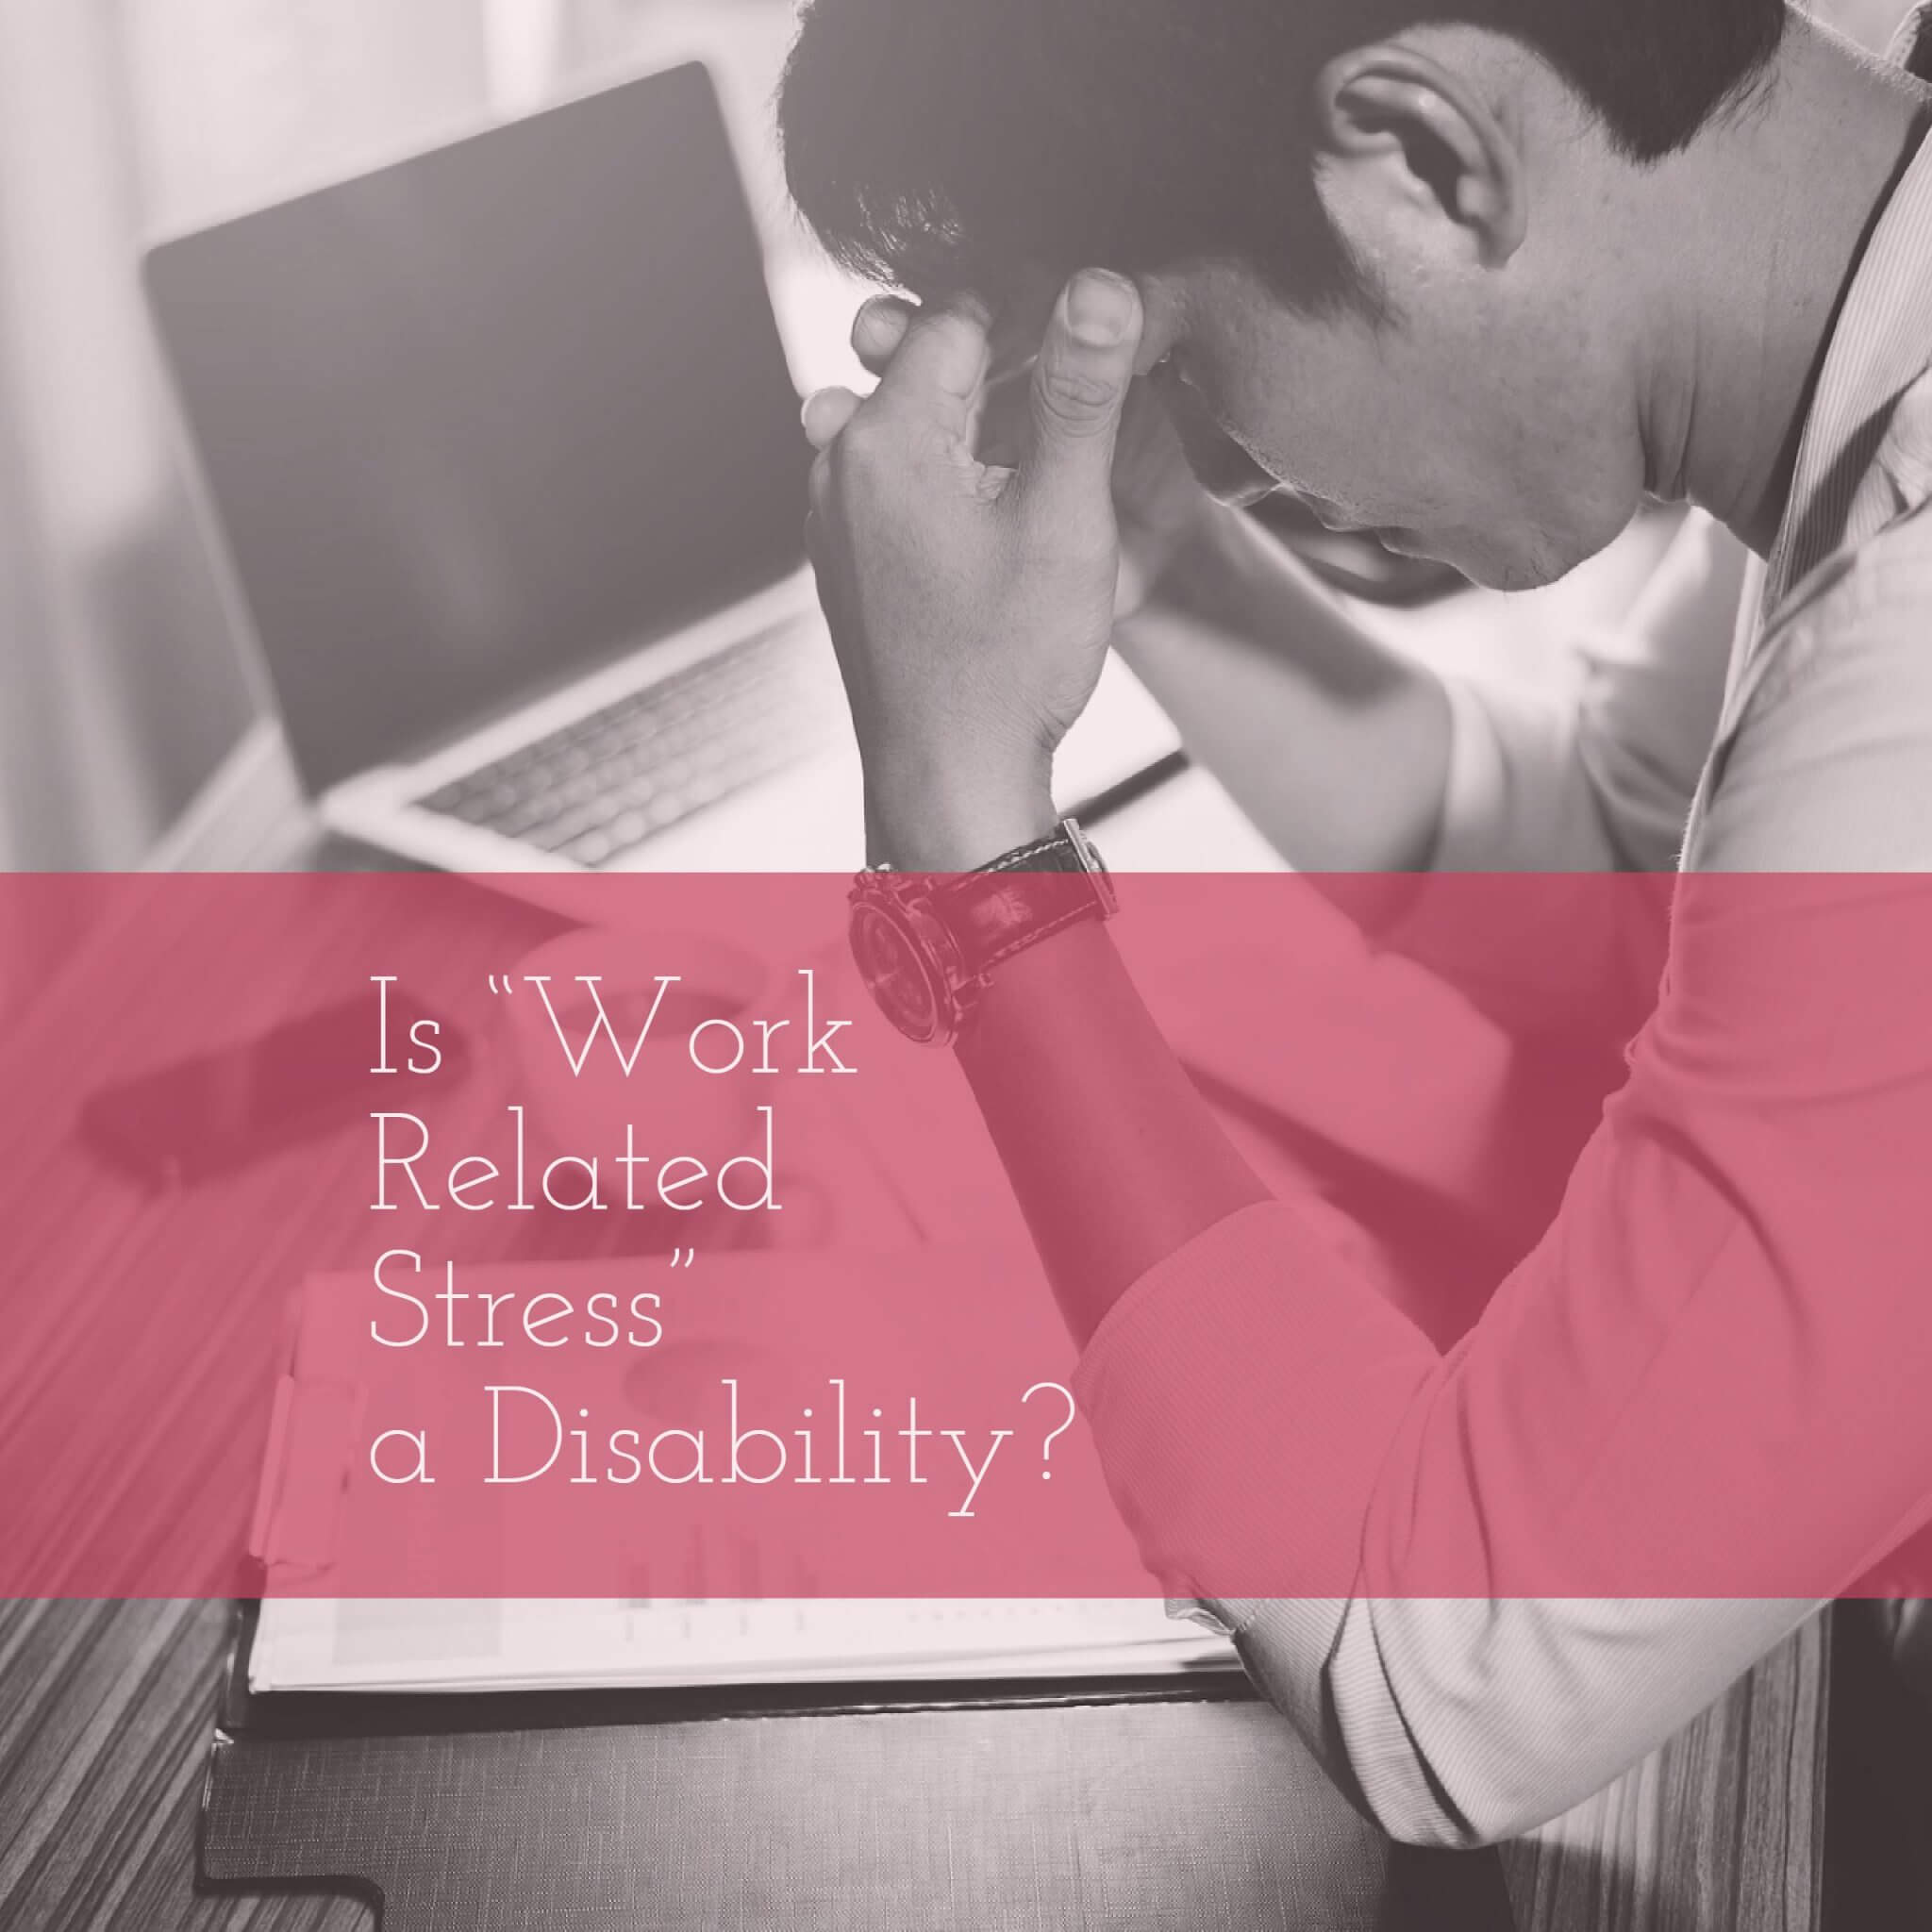 Is Work Related Stress a Disability?